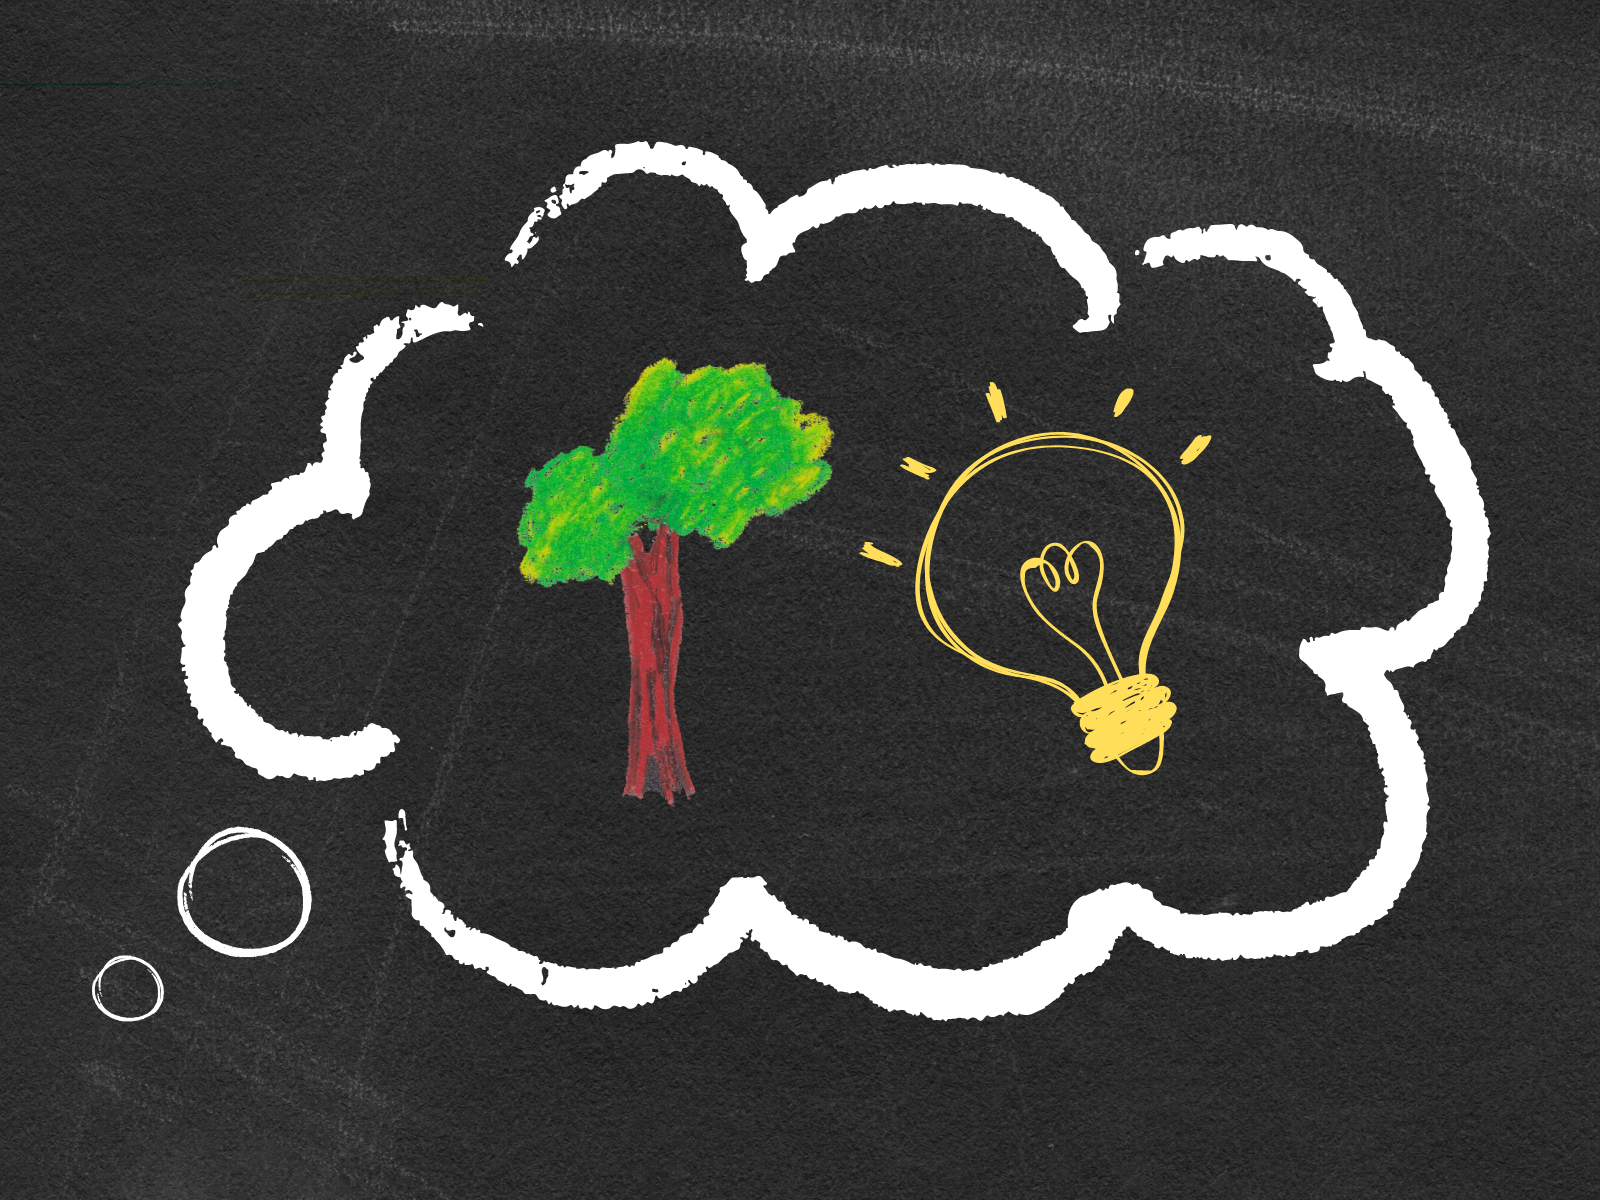 SISC Lab Canva Projects - Imagine sustainable world